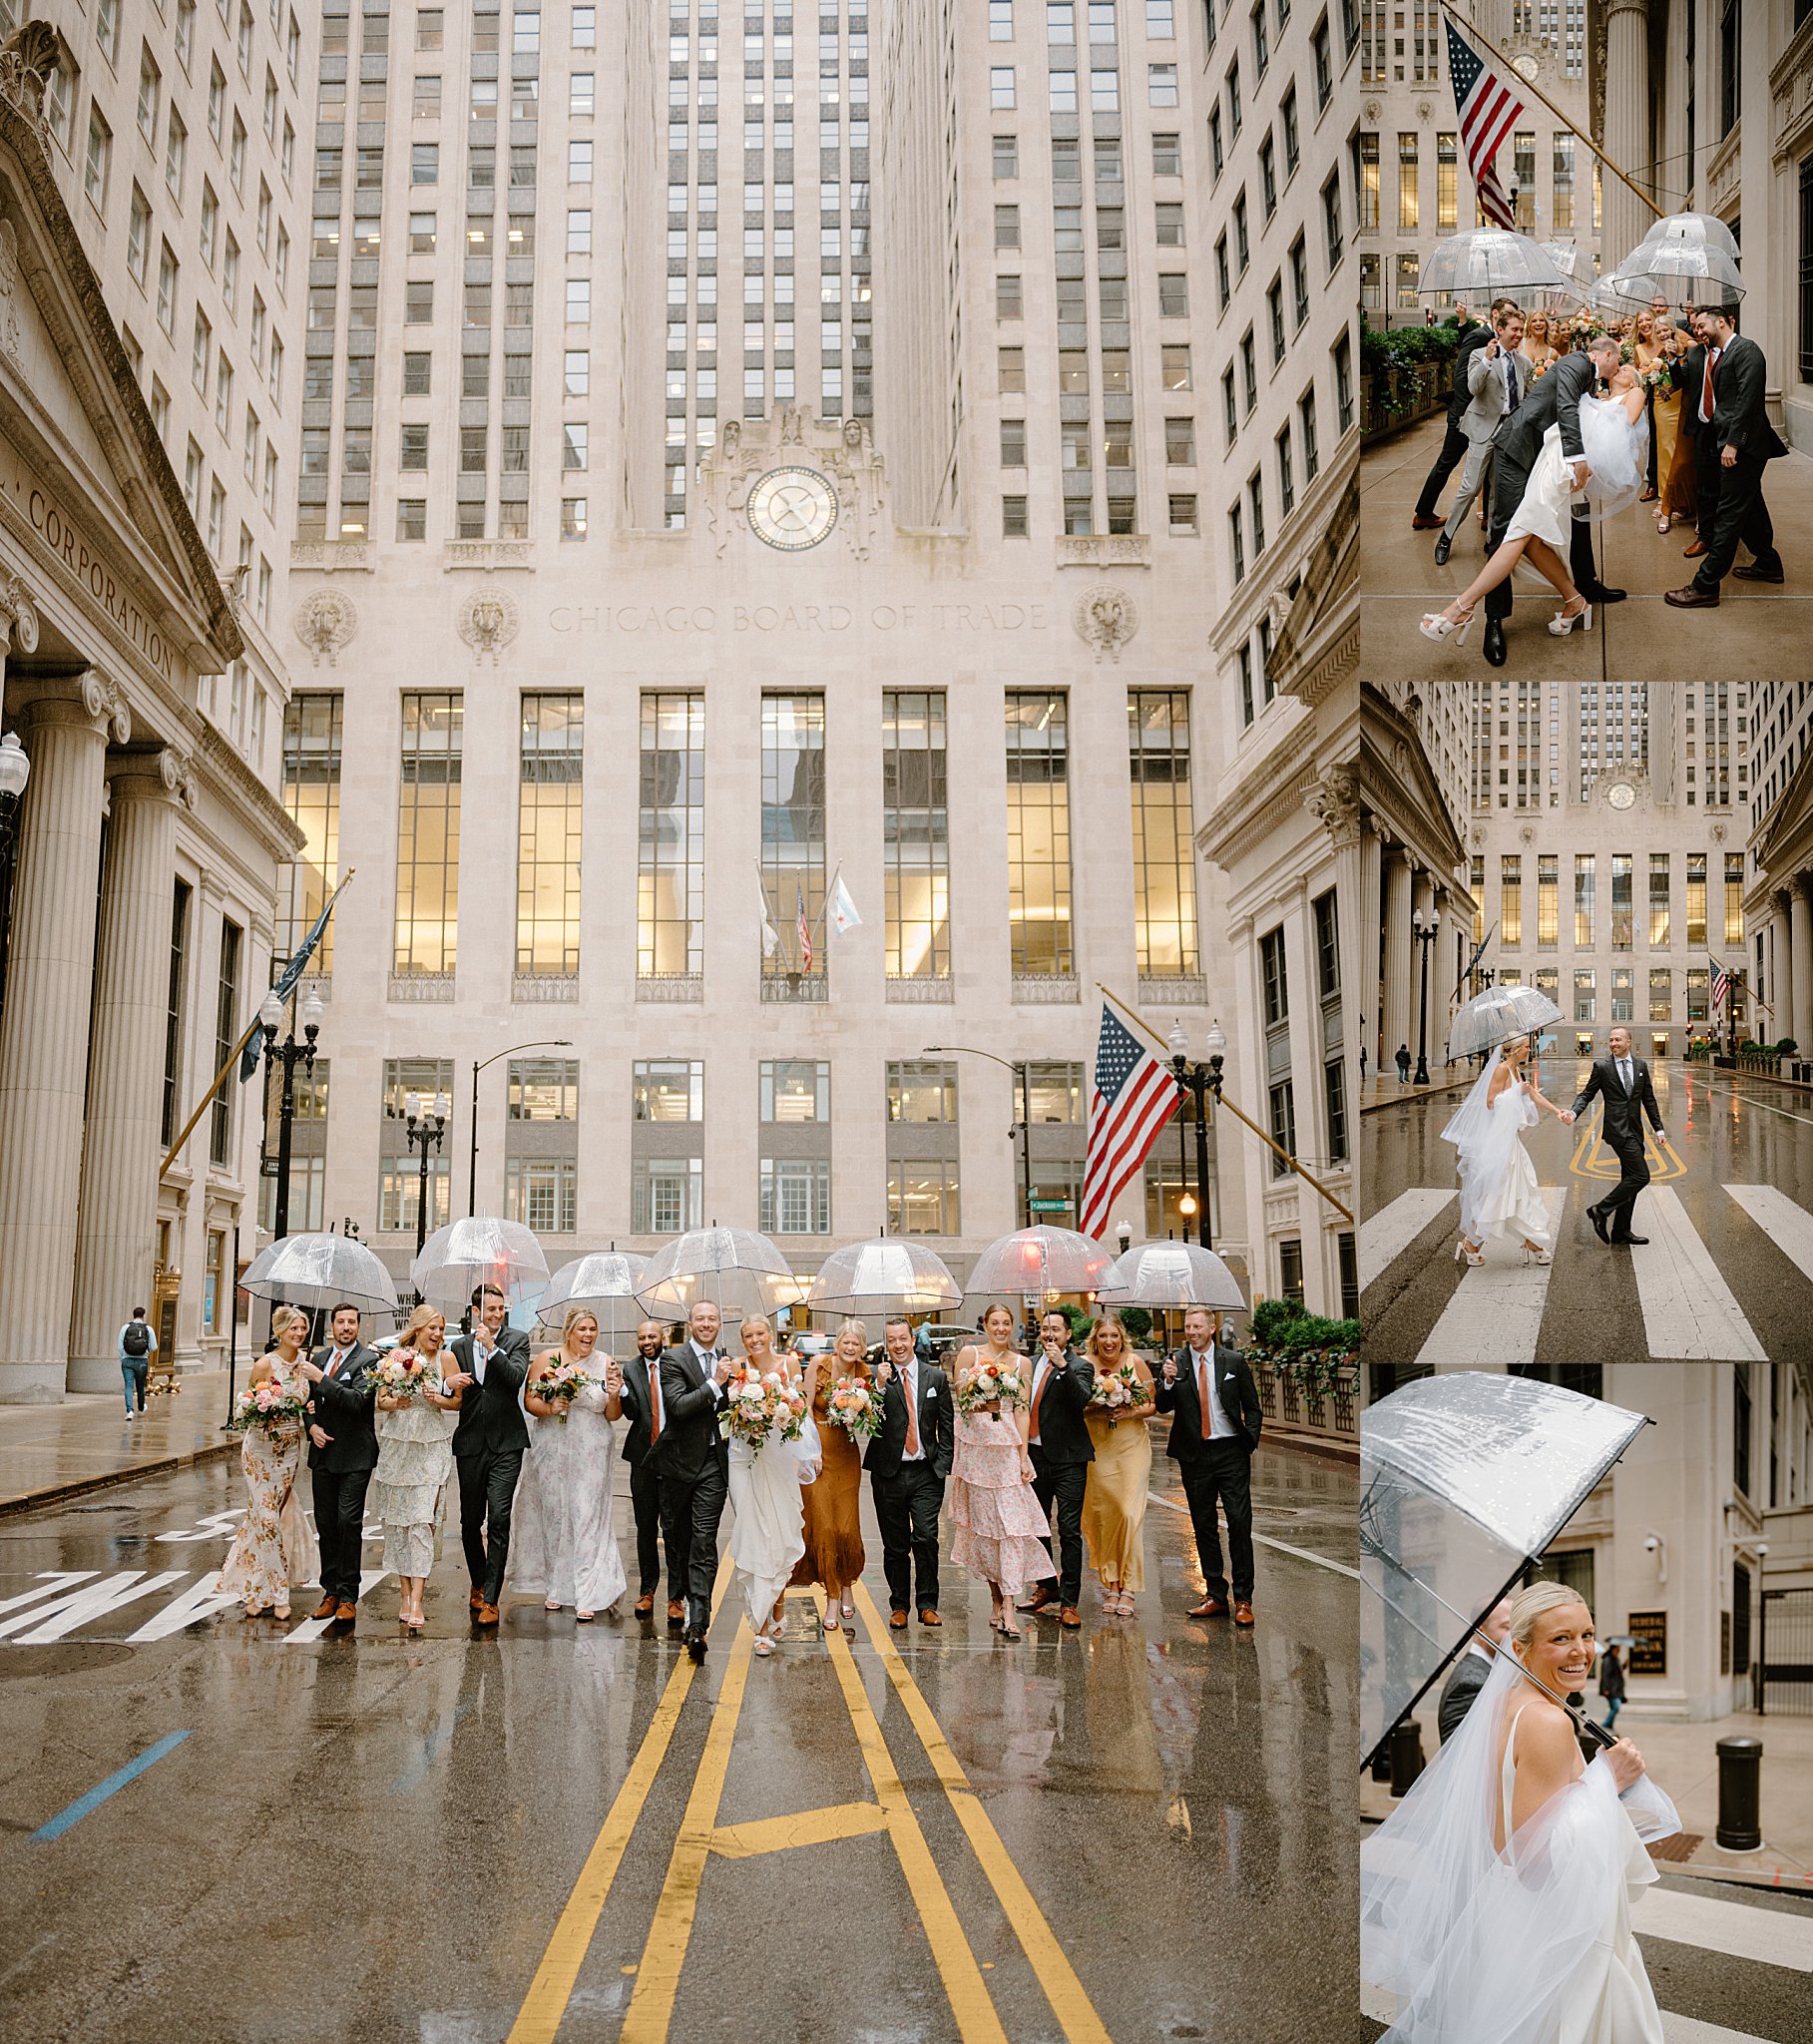 wedding party carries umbrellas as they walk in street by Indigo Lace Collective